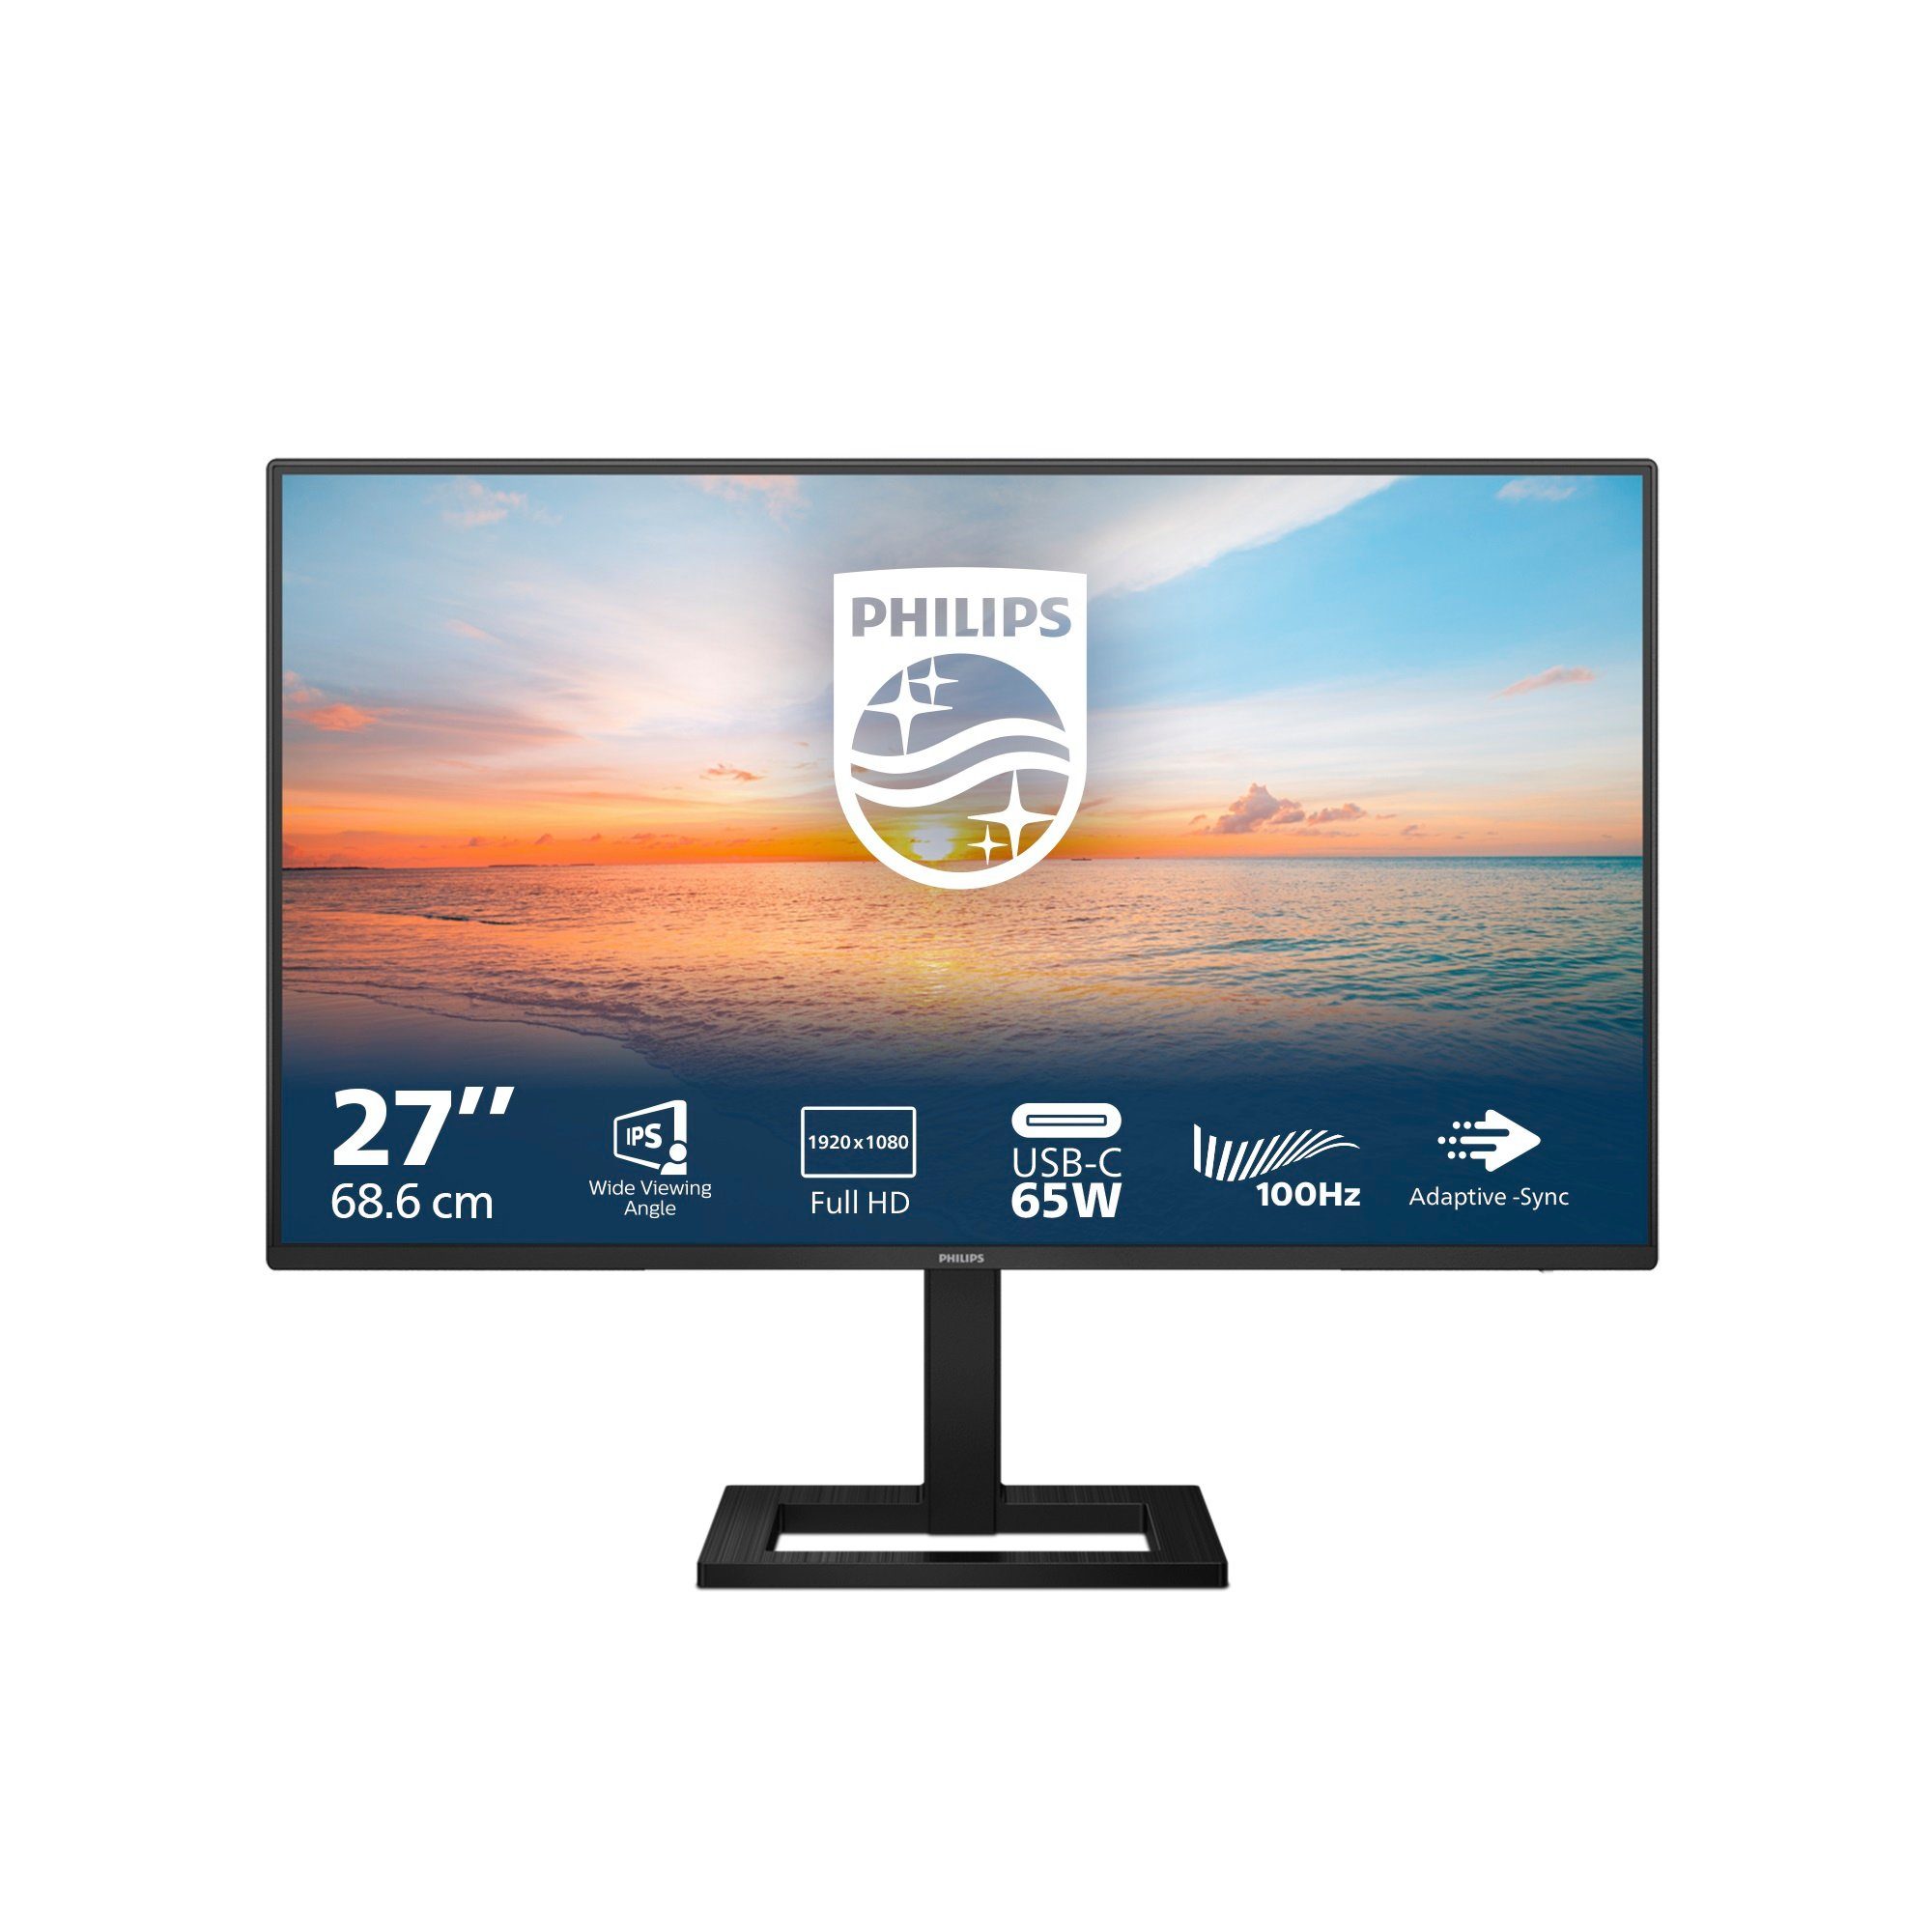 Philips 27E1N1300AE LCD-Monitor (68,5 cm/27 ", 1920 x 1080 px, Full HD, 1 ms Reaktionszeit, 100 Hz, IPS-LCD)